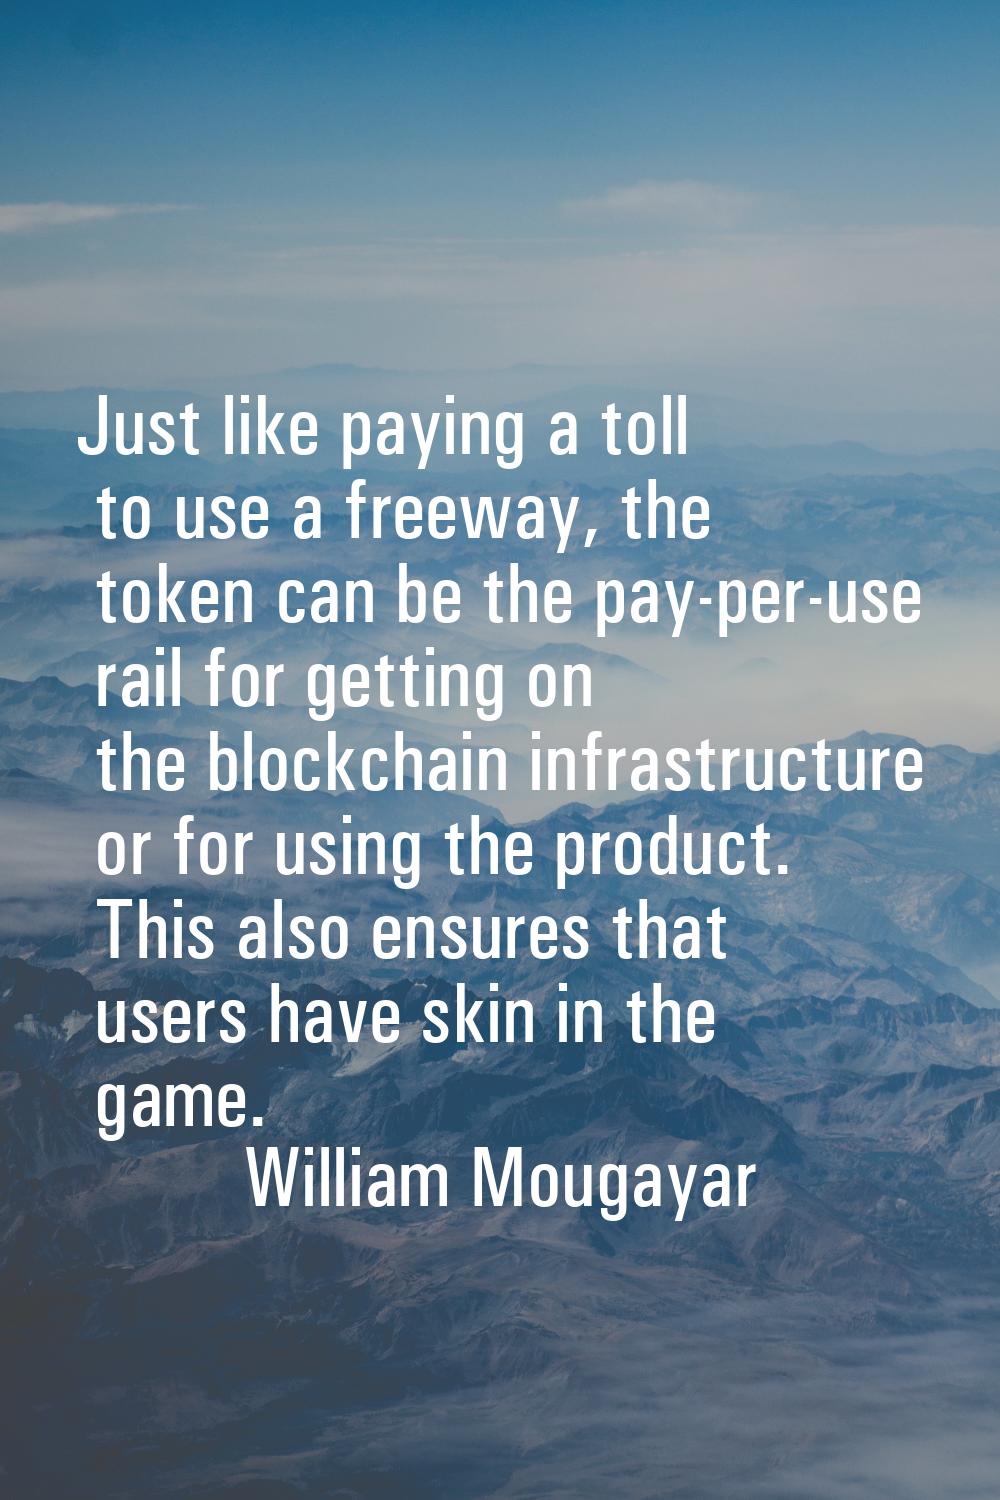 Just like paying a toll to use a freeway, the token can be the pay-per-use rail for getting on the 